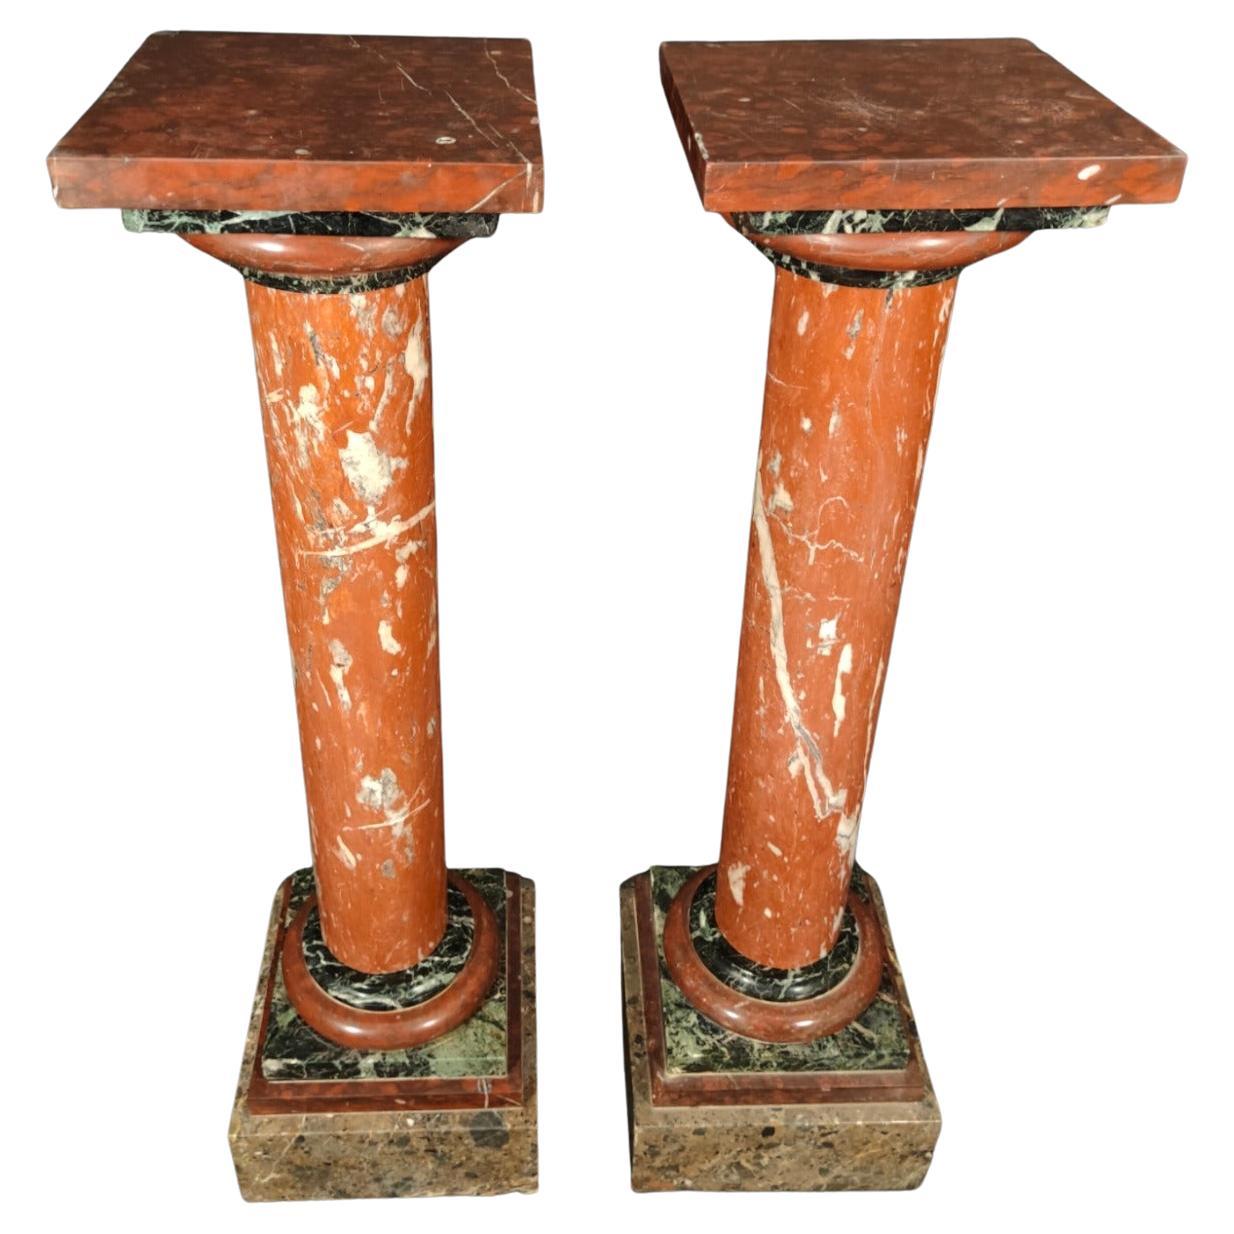 Pair of Columns from the 19th Century